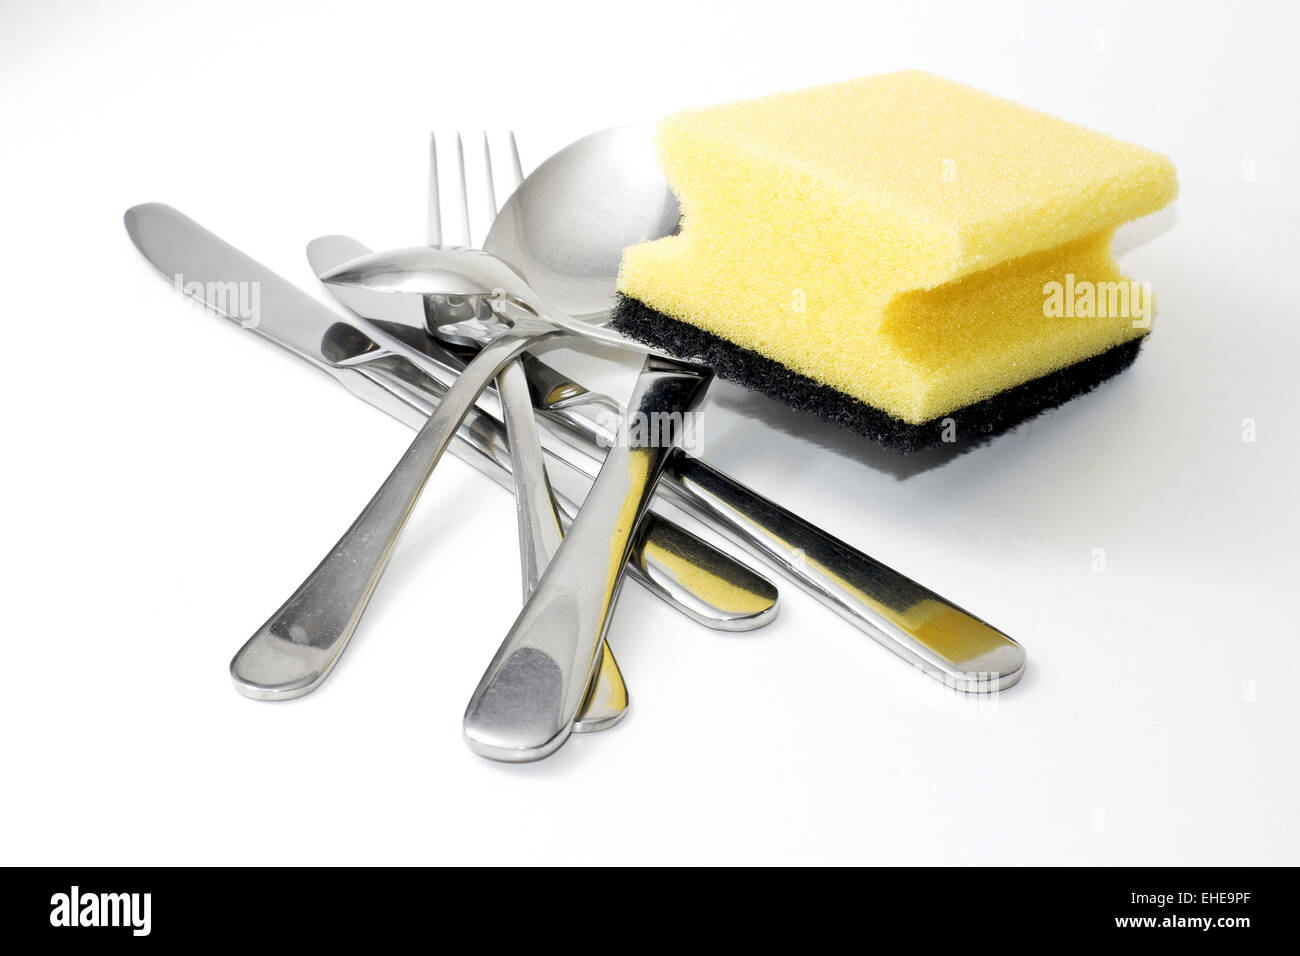 Silverware to be cleaned Stock Photo